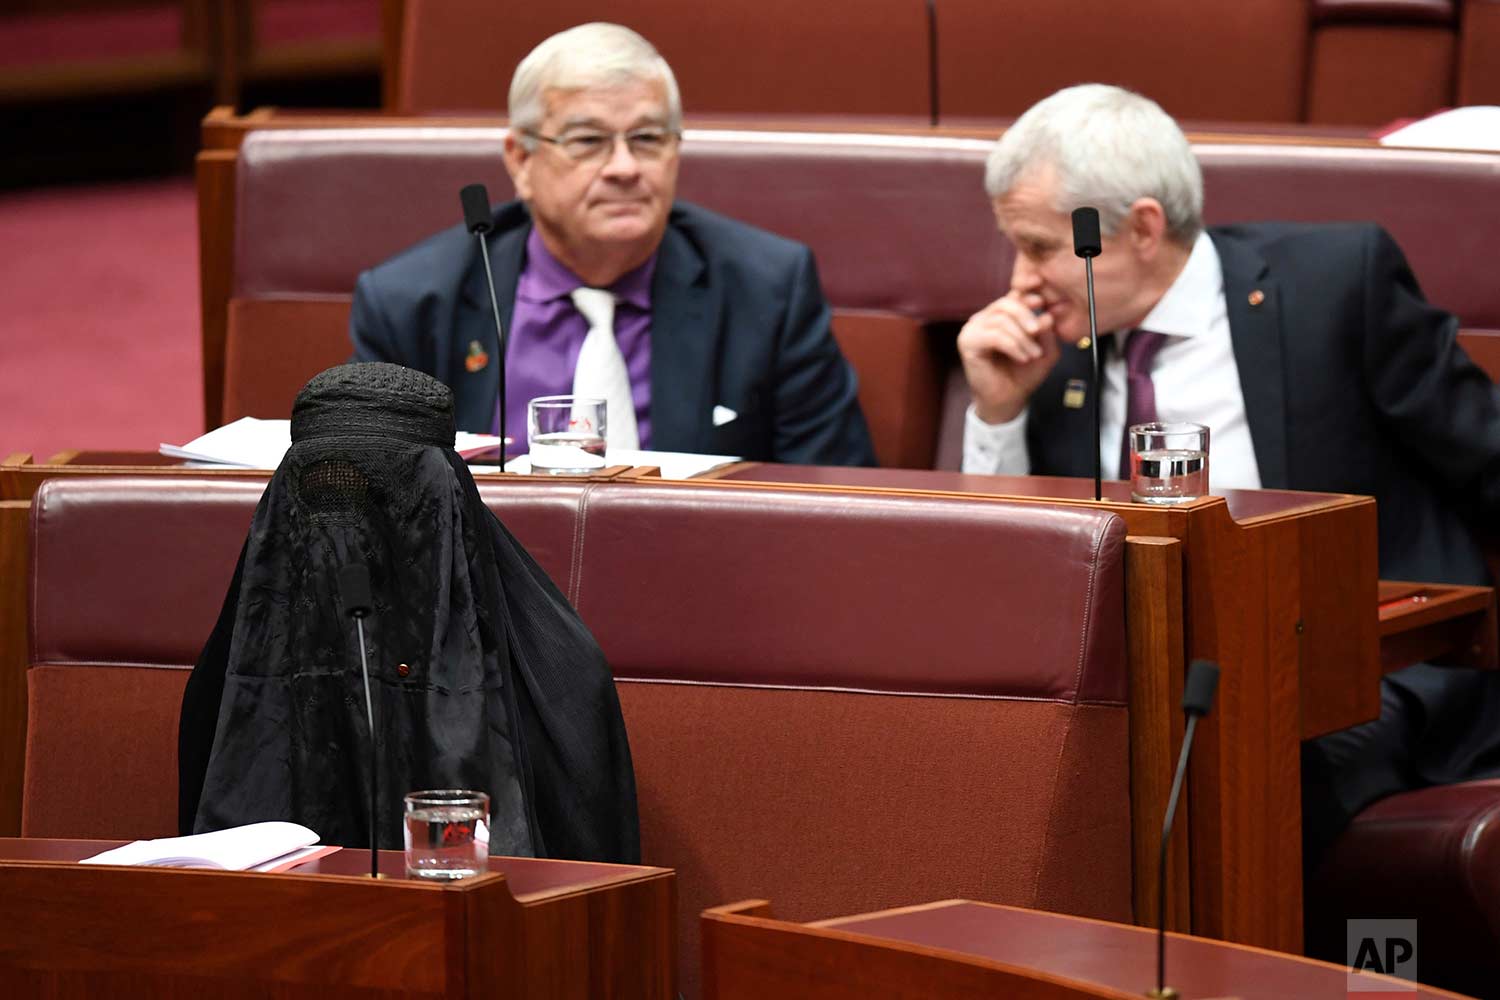  Sen. Pauline Hanson, bottom left, wears a burqa during question time in the Senate chamber at Parliament House in Canberra, Australia, Thursday, Aug. 17, 2017. (Lukas Coch/AAP Image via AP) 